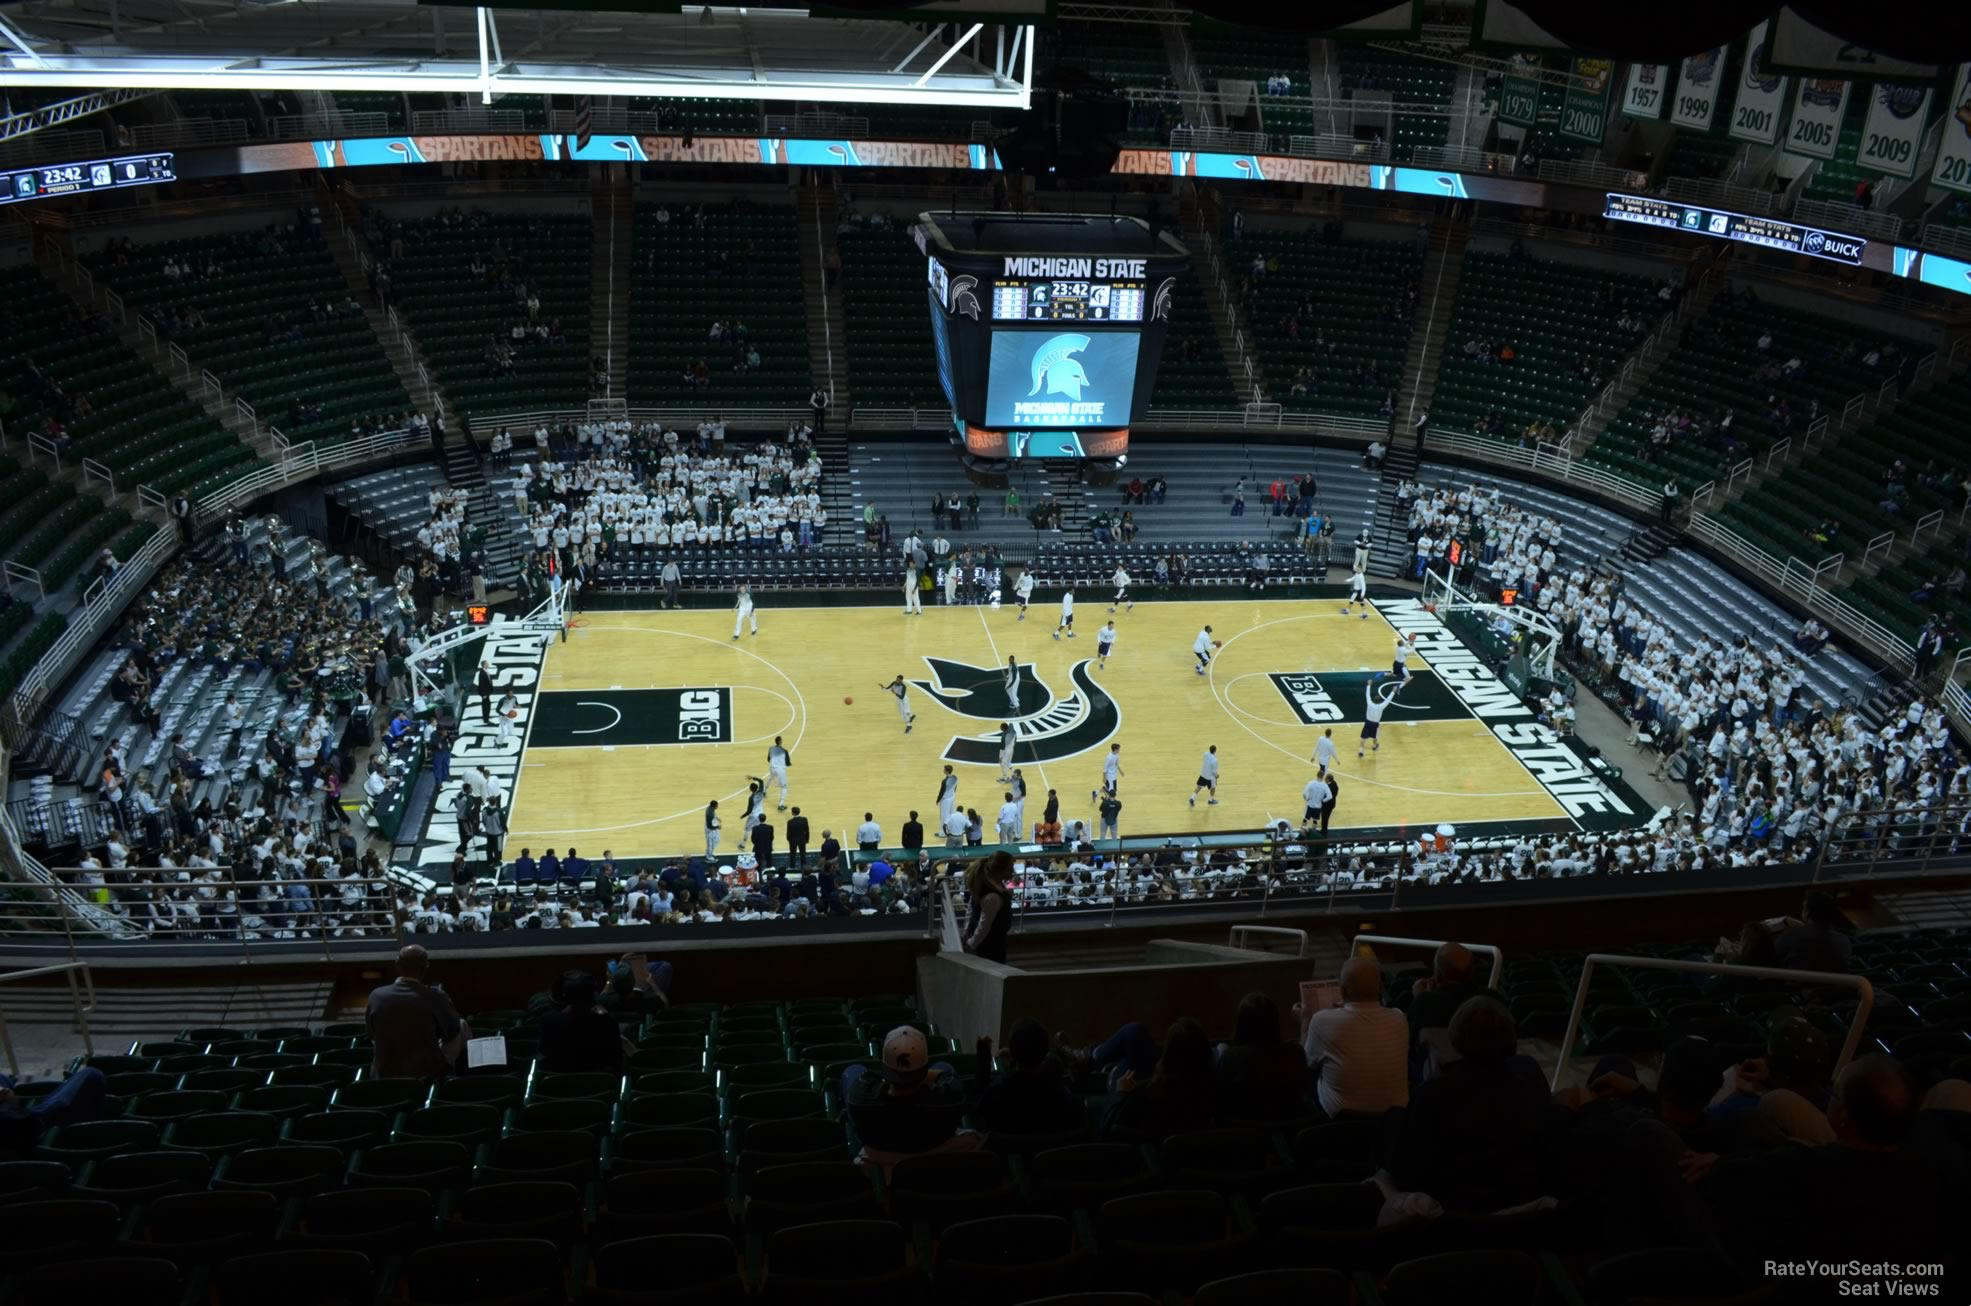 section 210, row 15 seat view  - breslin center